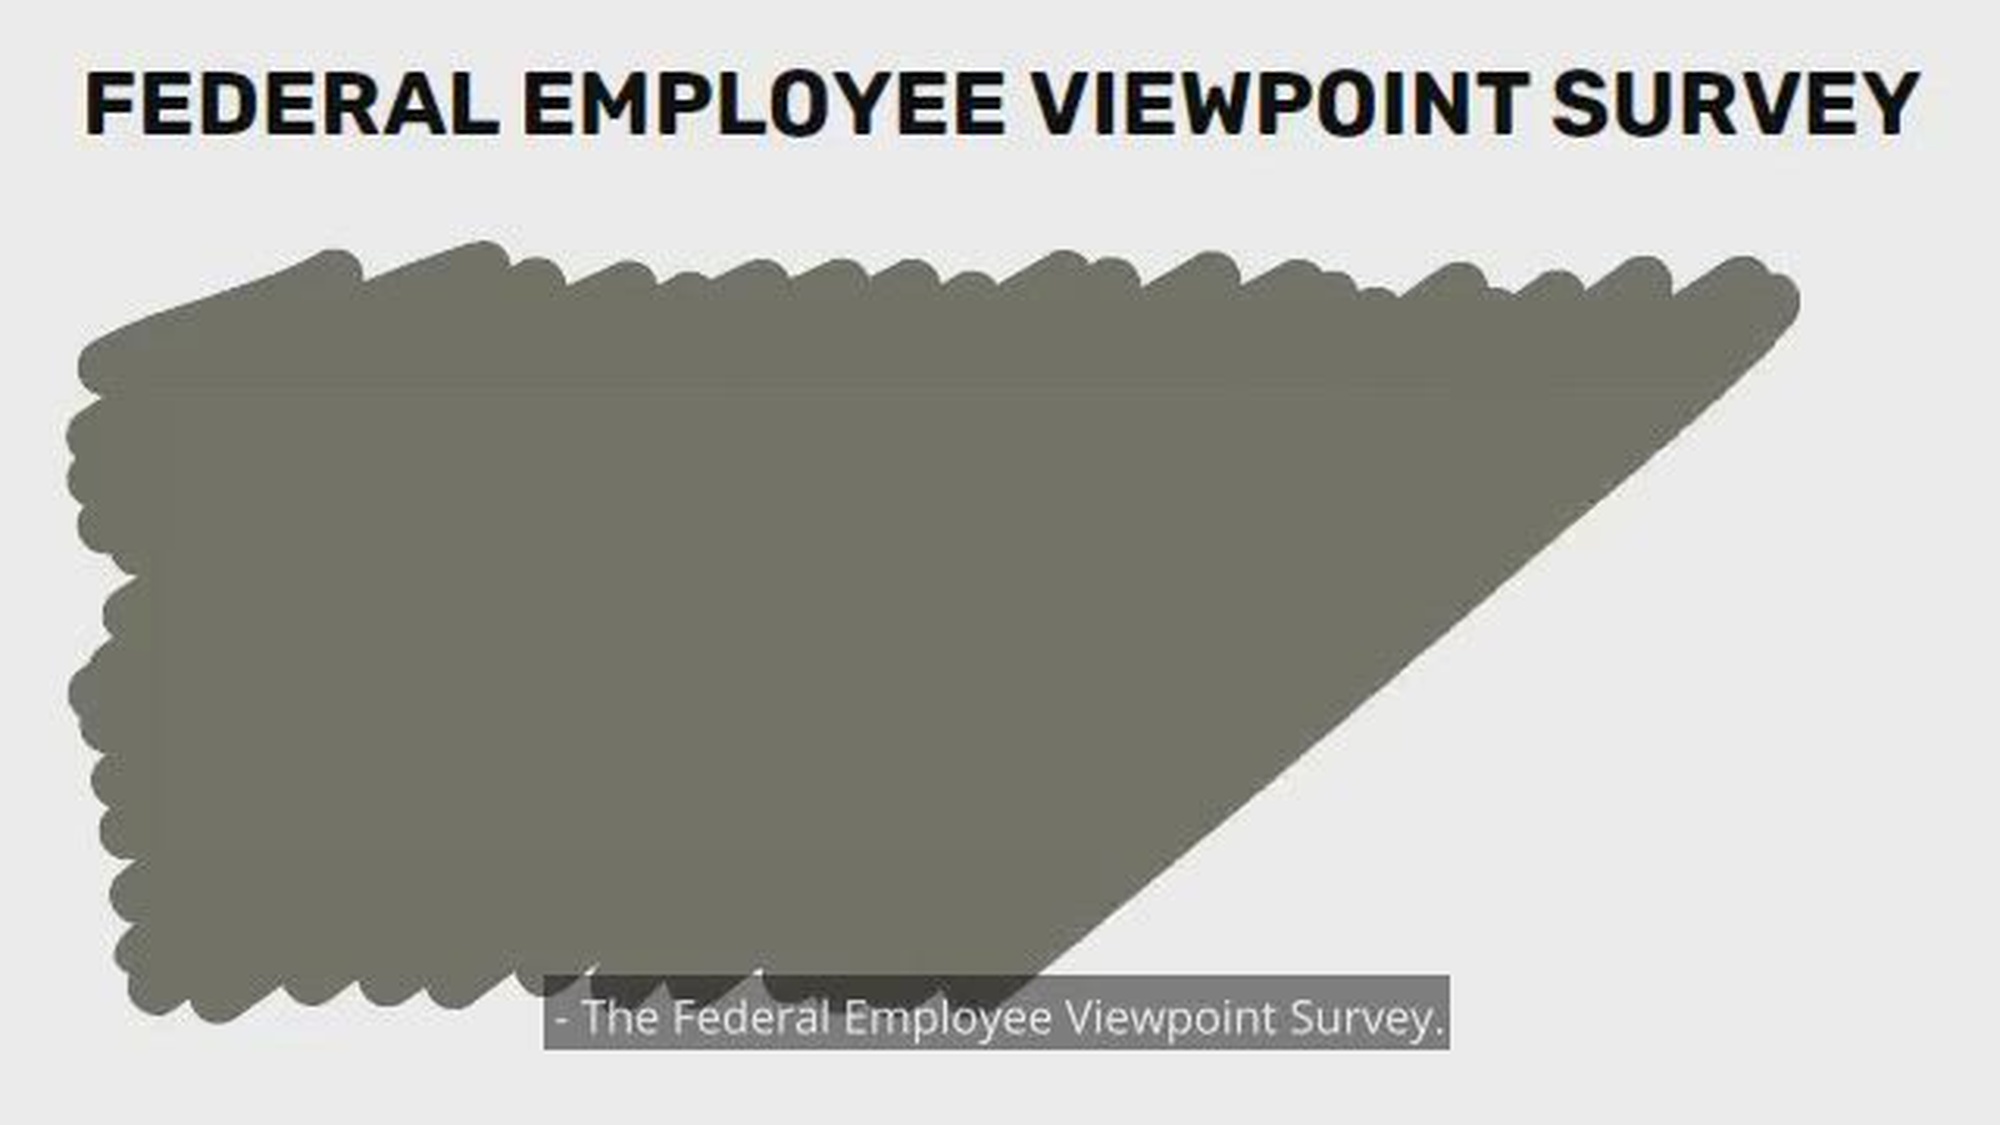 The Office of Personnel Management Federal Employee Viewpoint Survey is administered to employees of Departments and large agencies and the small/independent agencies that accept an invitation to participate in the survey. All non-political, non-contractor Army employees onboard as of Nov. 30, 2023, are eligible. Employees receive the survey via direct email from OPM.